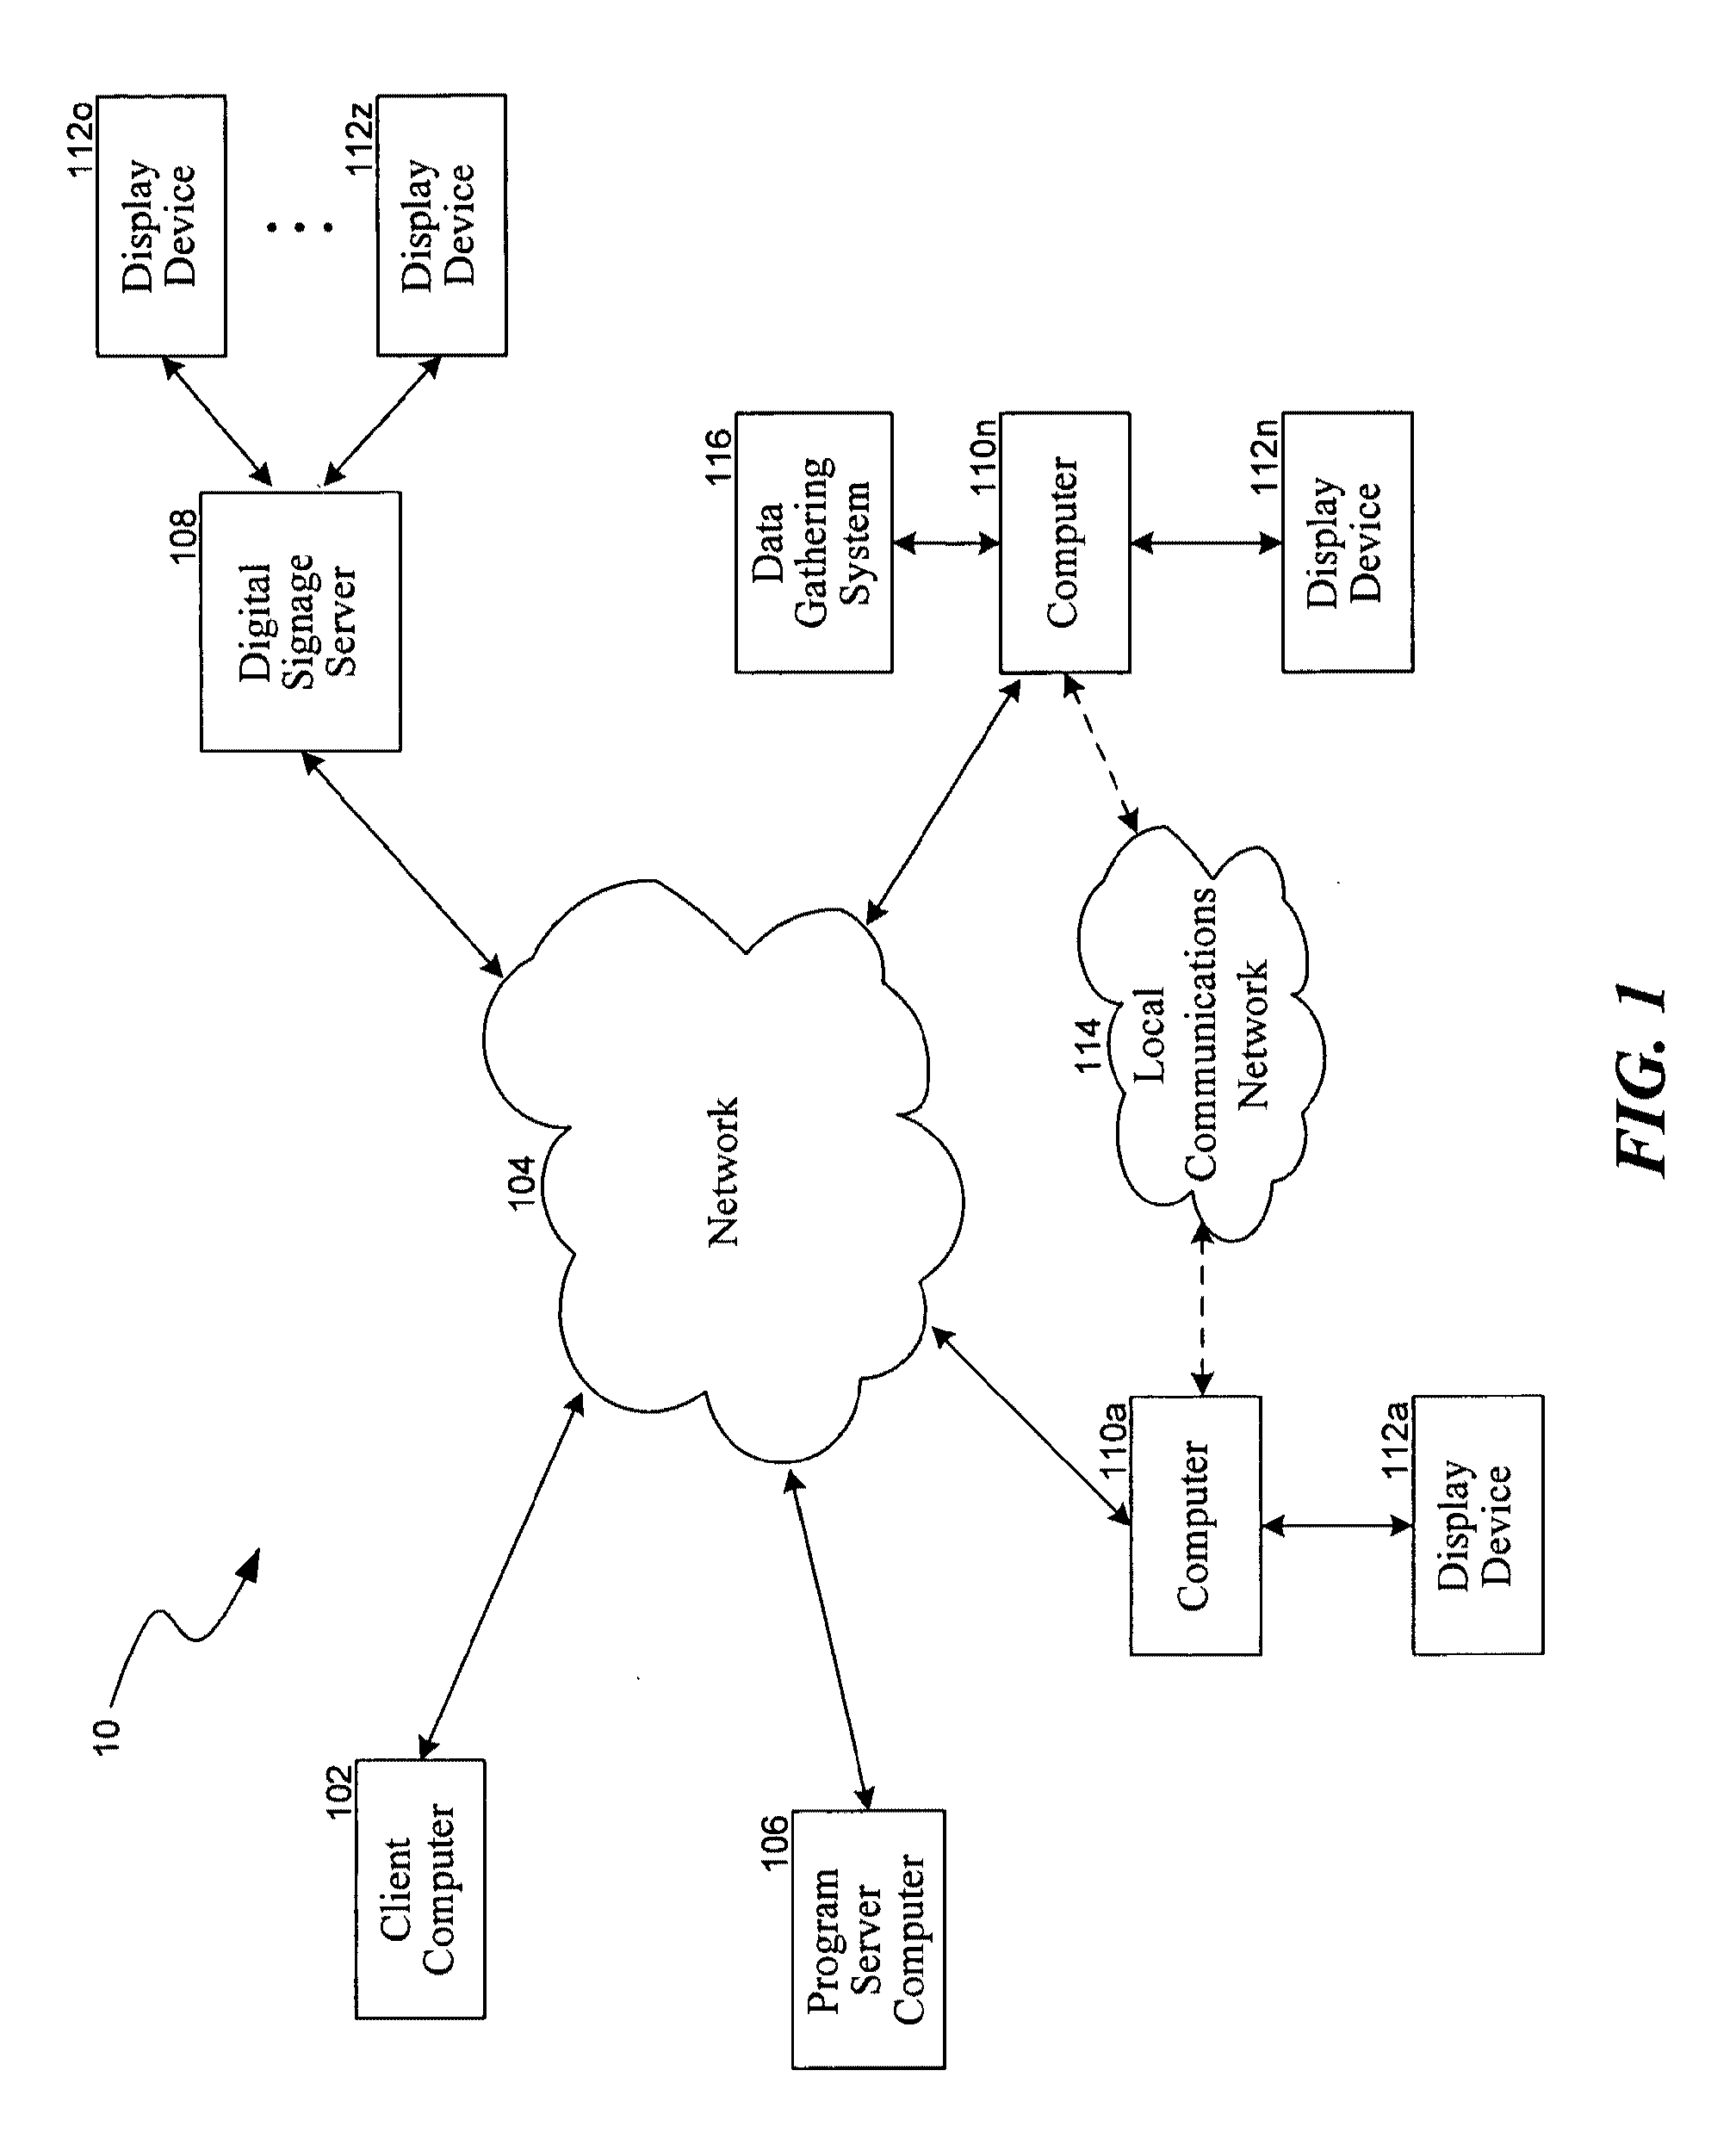 System and method for delivering and optimizing media programming in public spaces with interactive digital signage networks through mobile device access